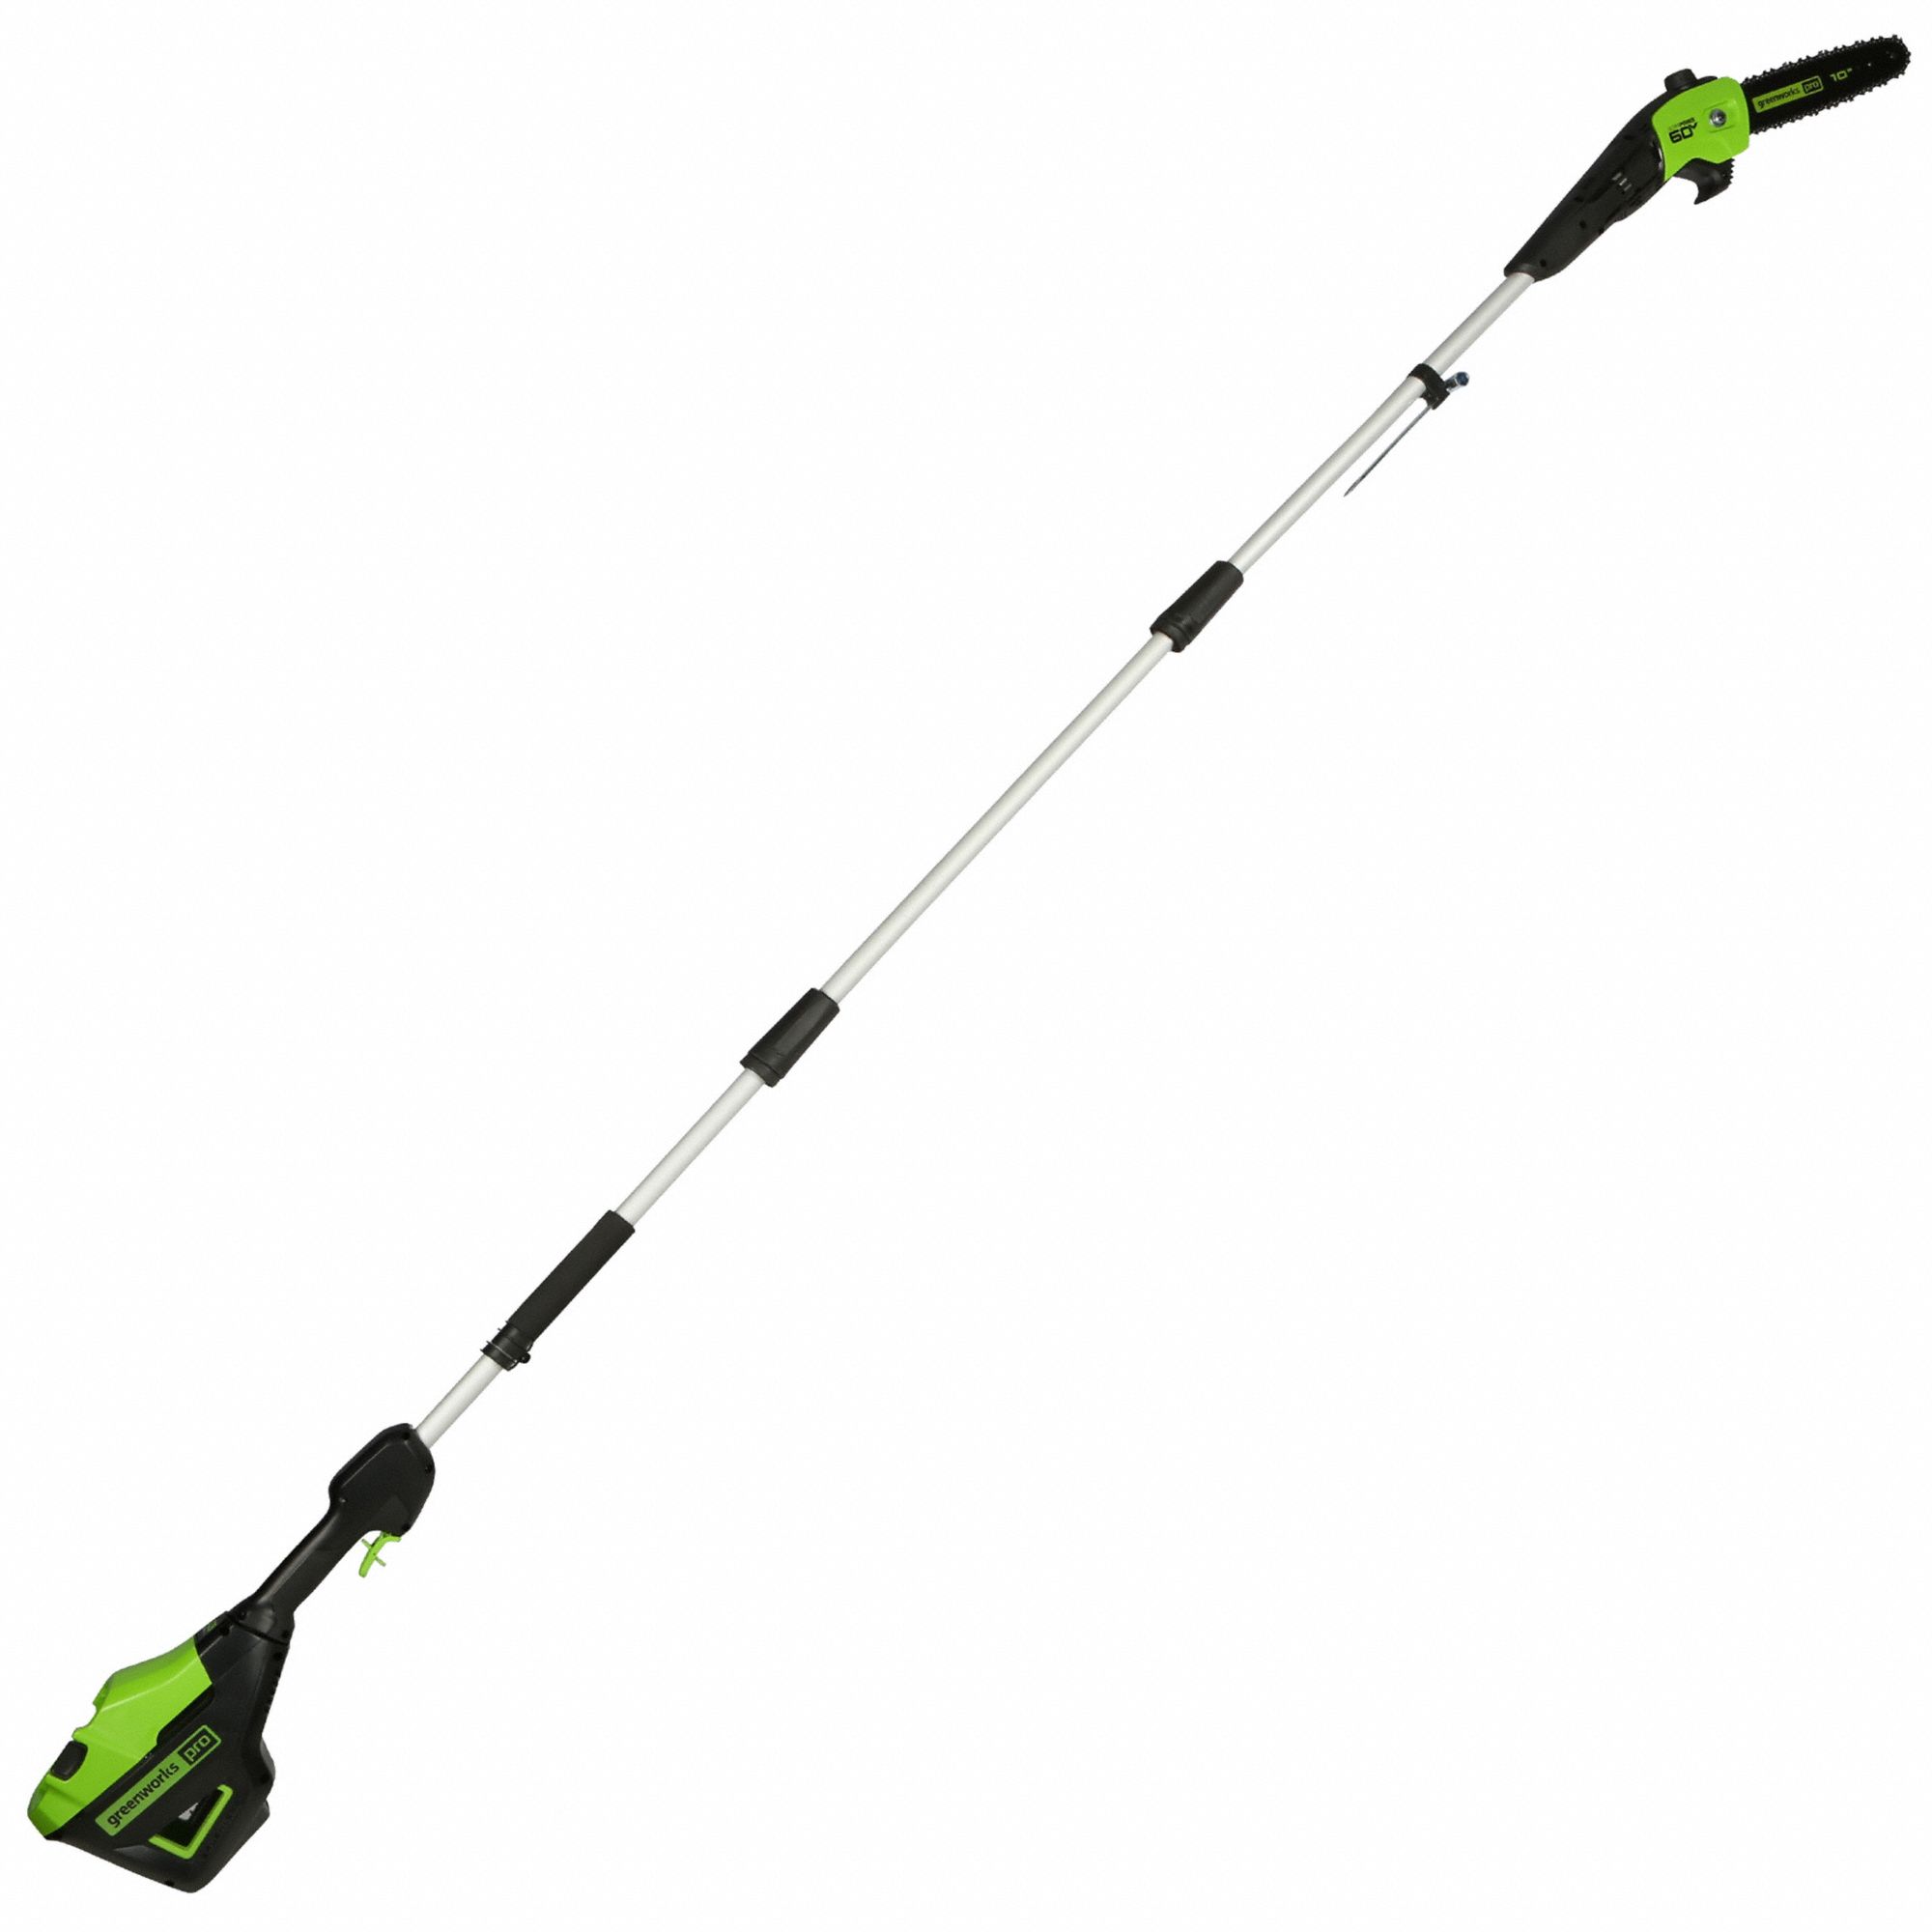 Cordless Pole Saw: 10 in Bar Lg, 8 ft Shaft Lg, 8 in Max. Cutting Dia., Brushless Motor